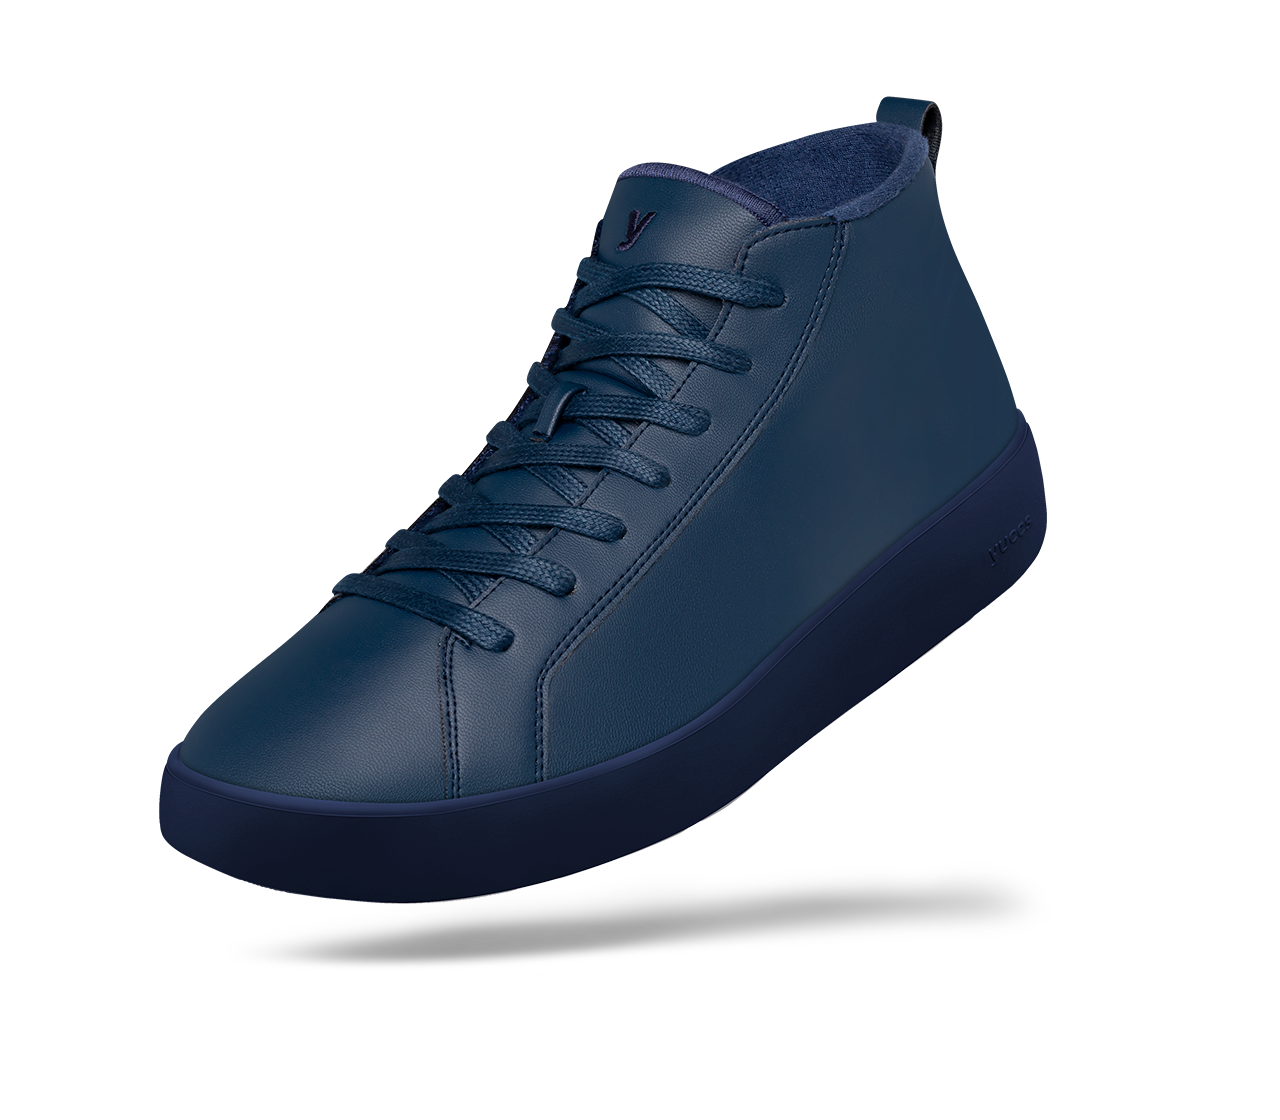 Grape Casual Boot WP Hommes